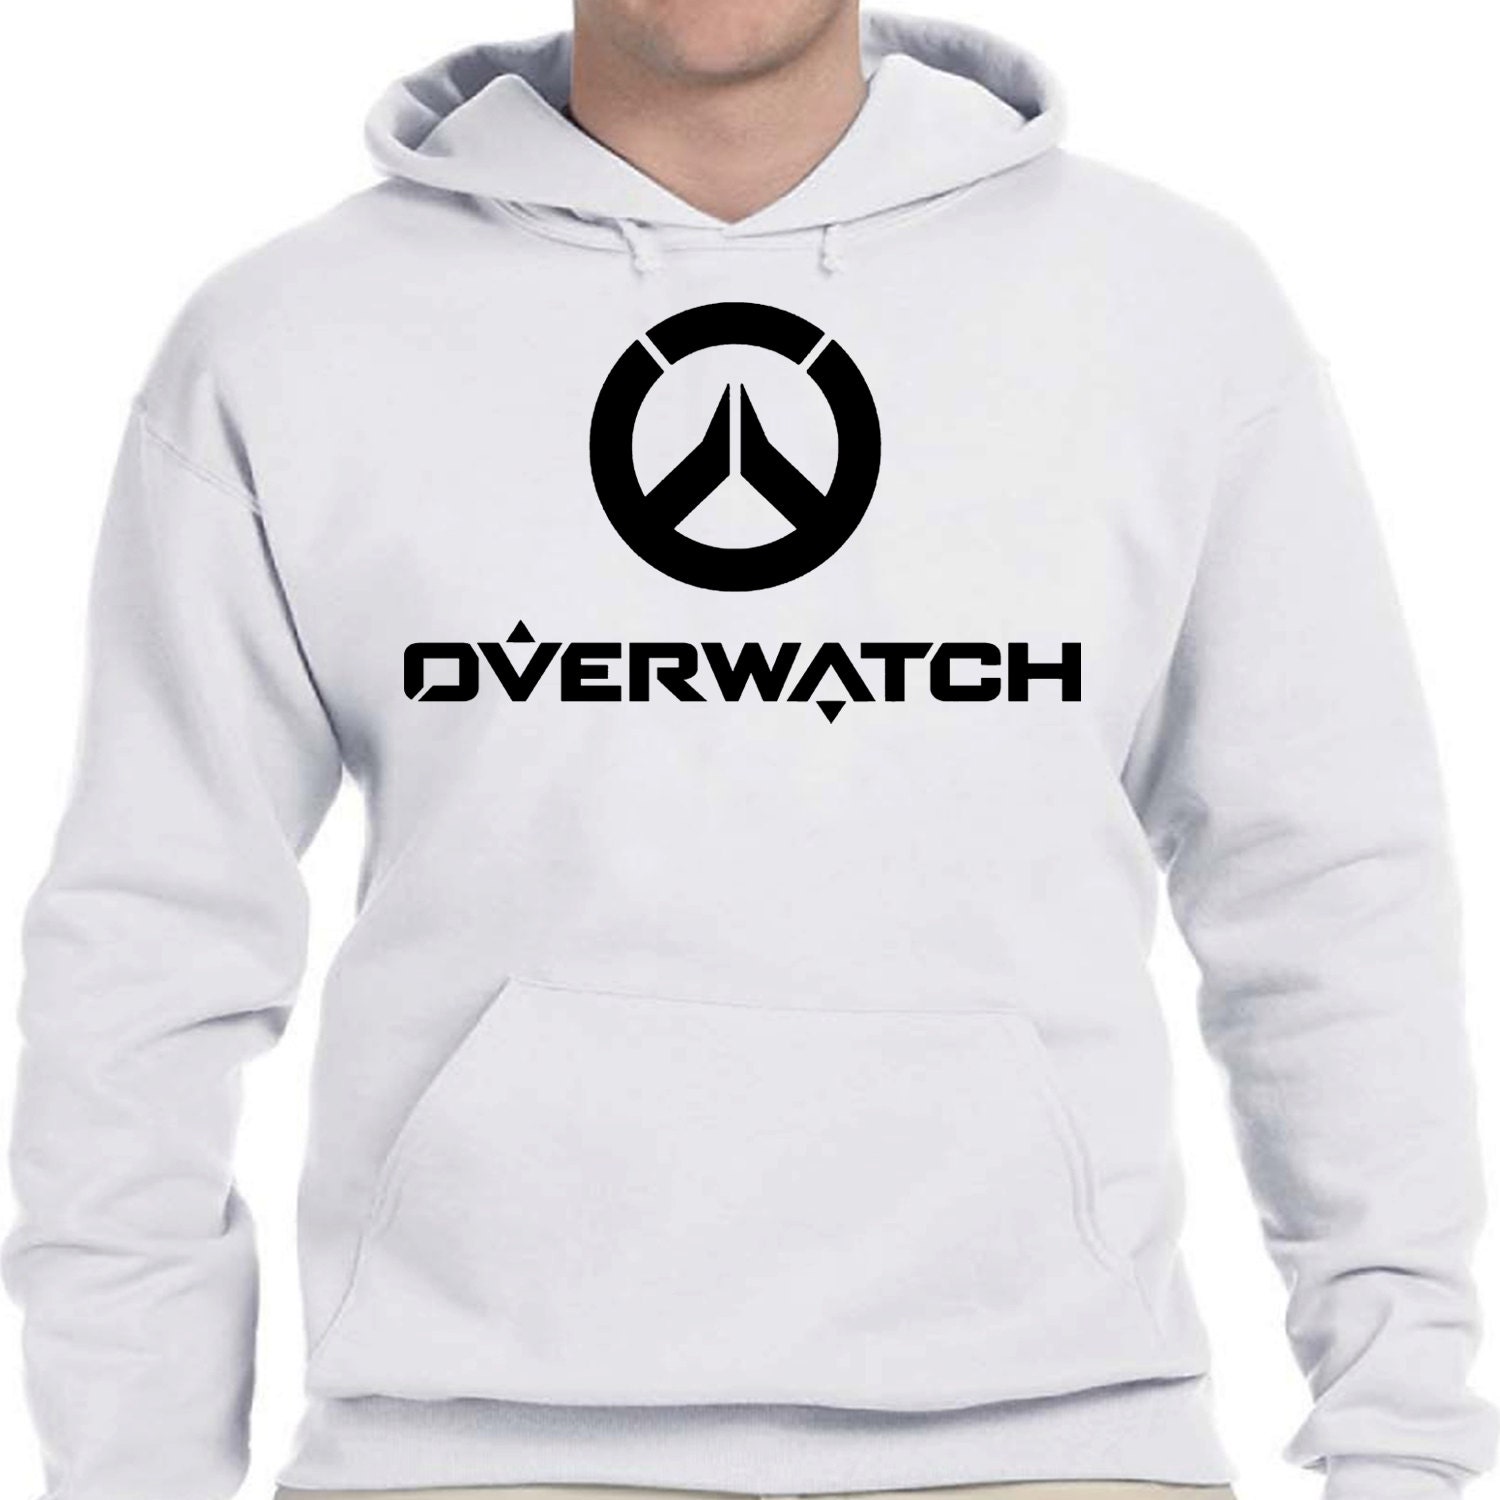 Overwatch Game Clothing Pullover Hoodie Sweater